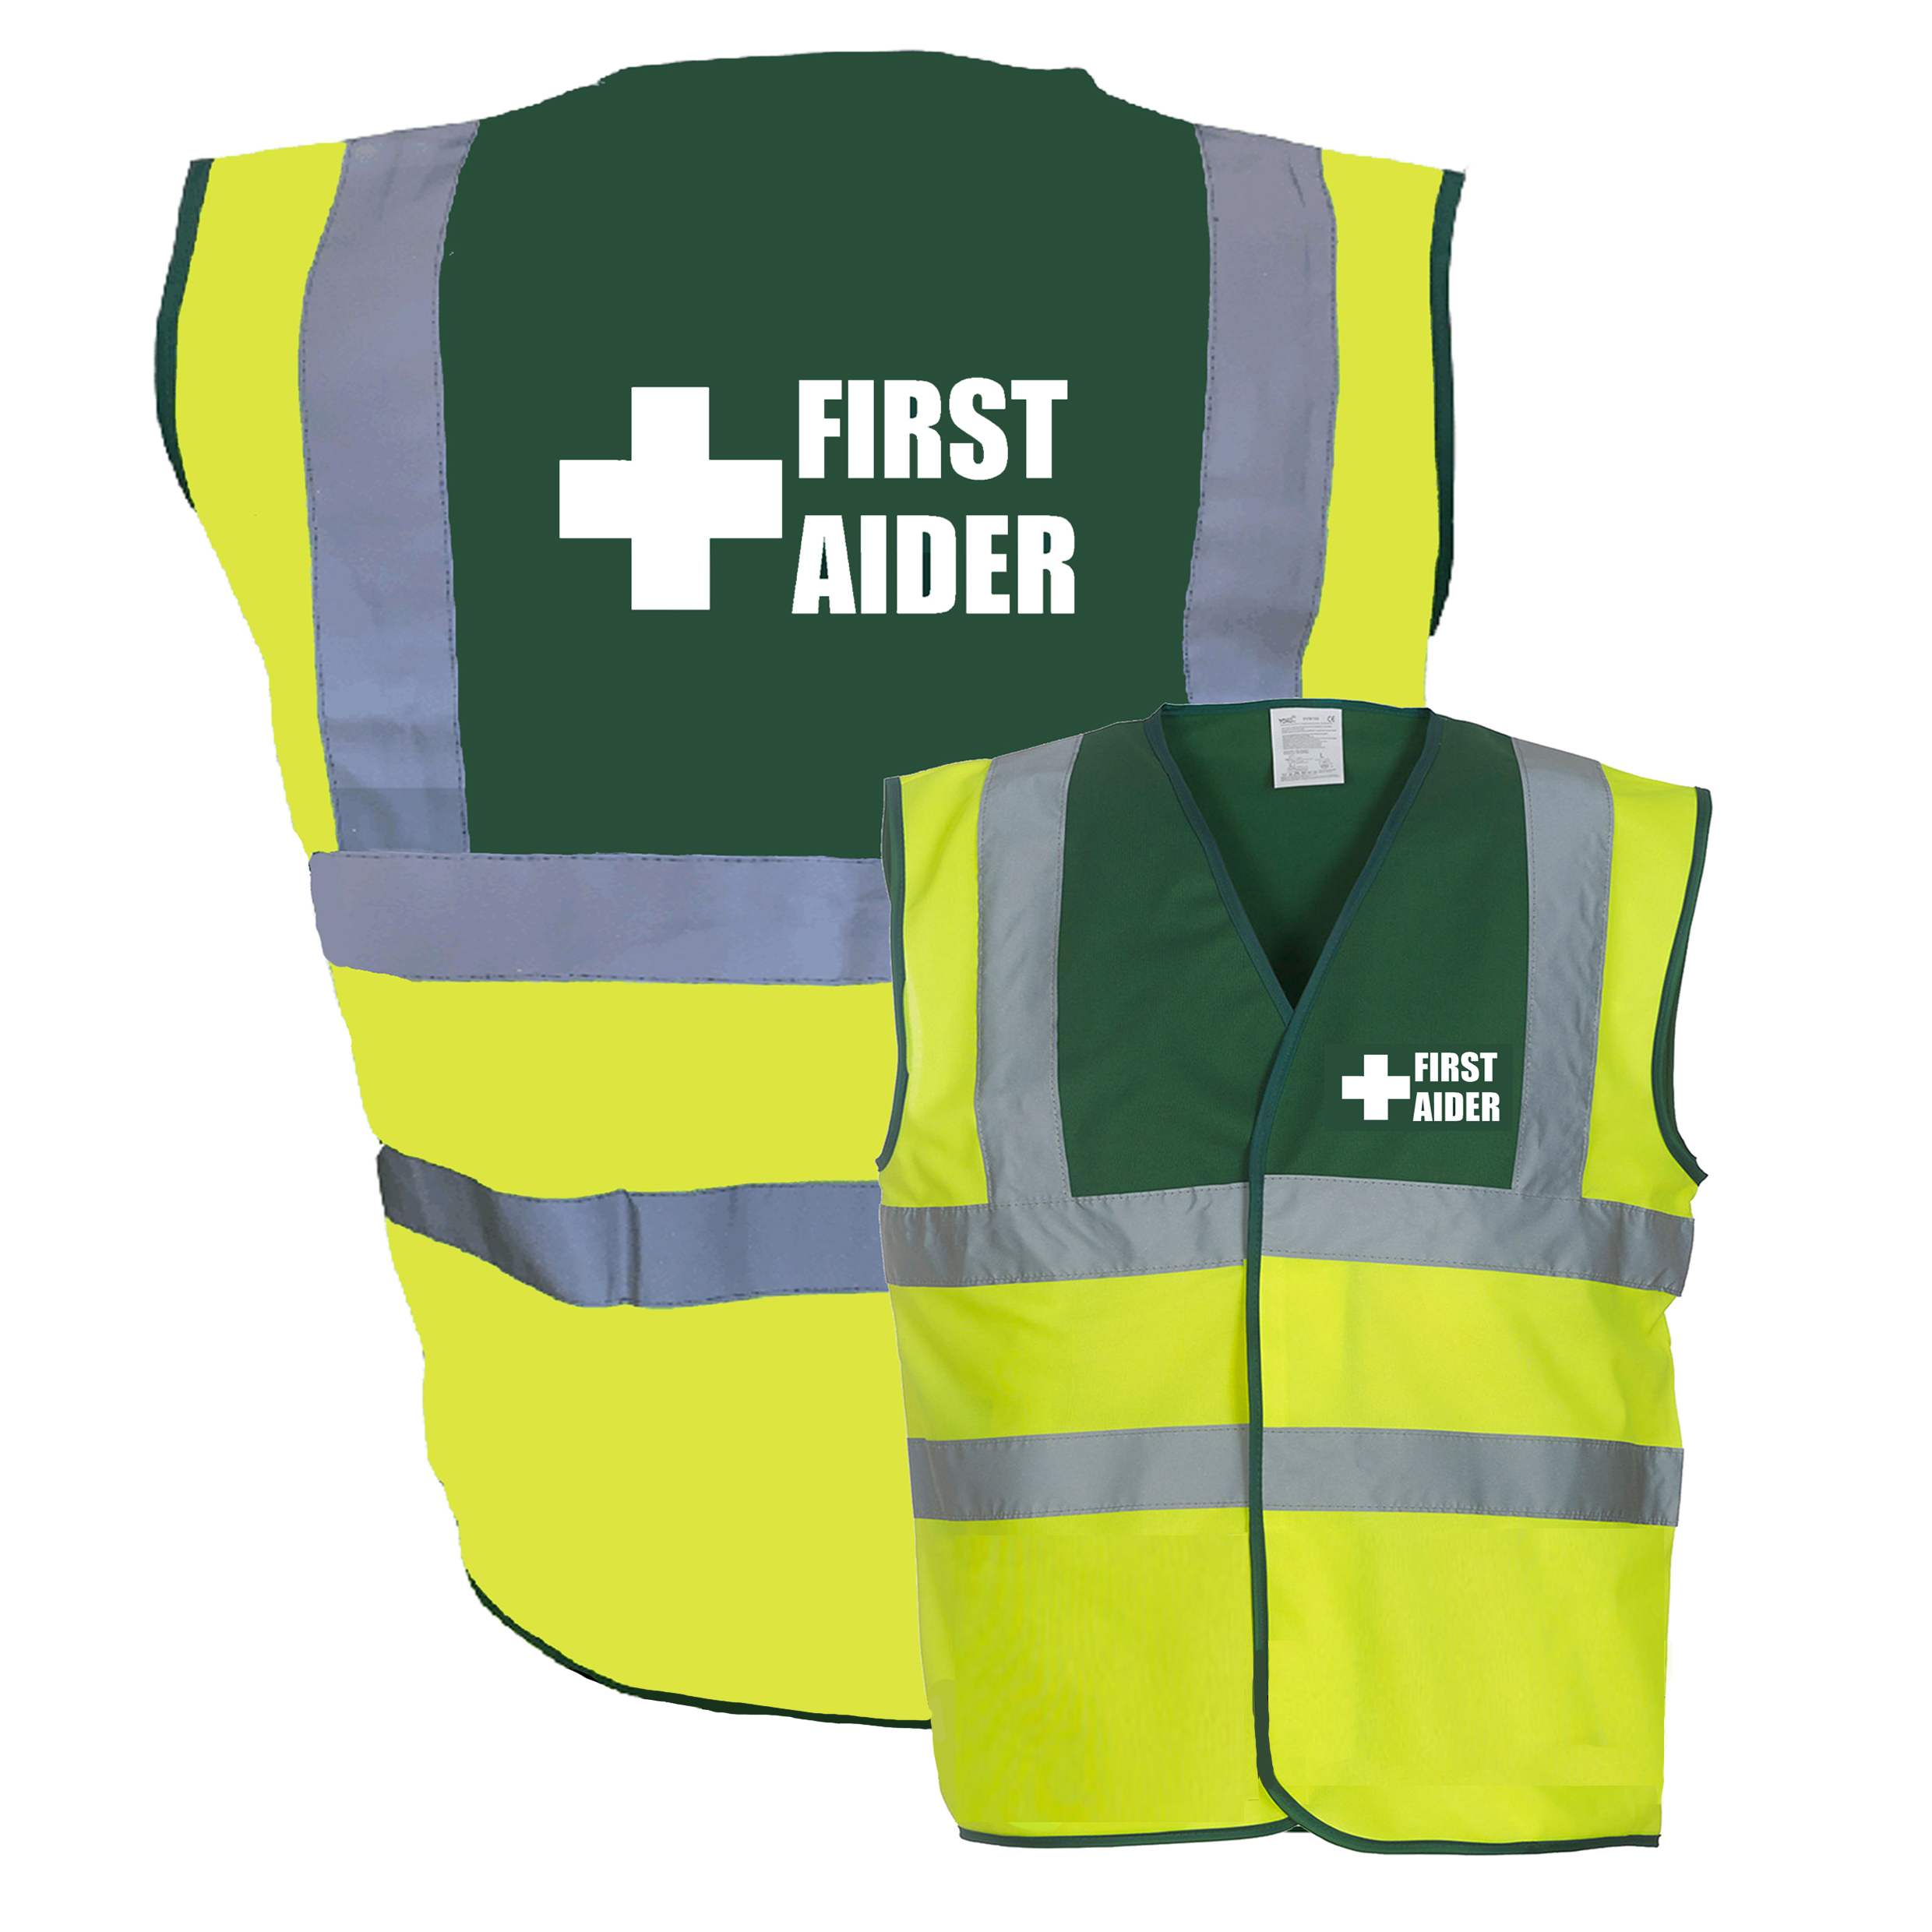 FIRST AIDER FIRST AIDER PRINTED GREEN POLO SHIRT FIRST AID MEDICAL WORKWEAR